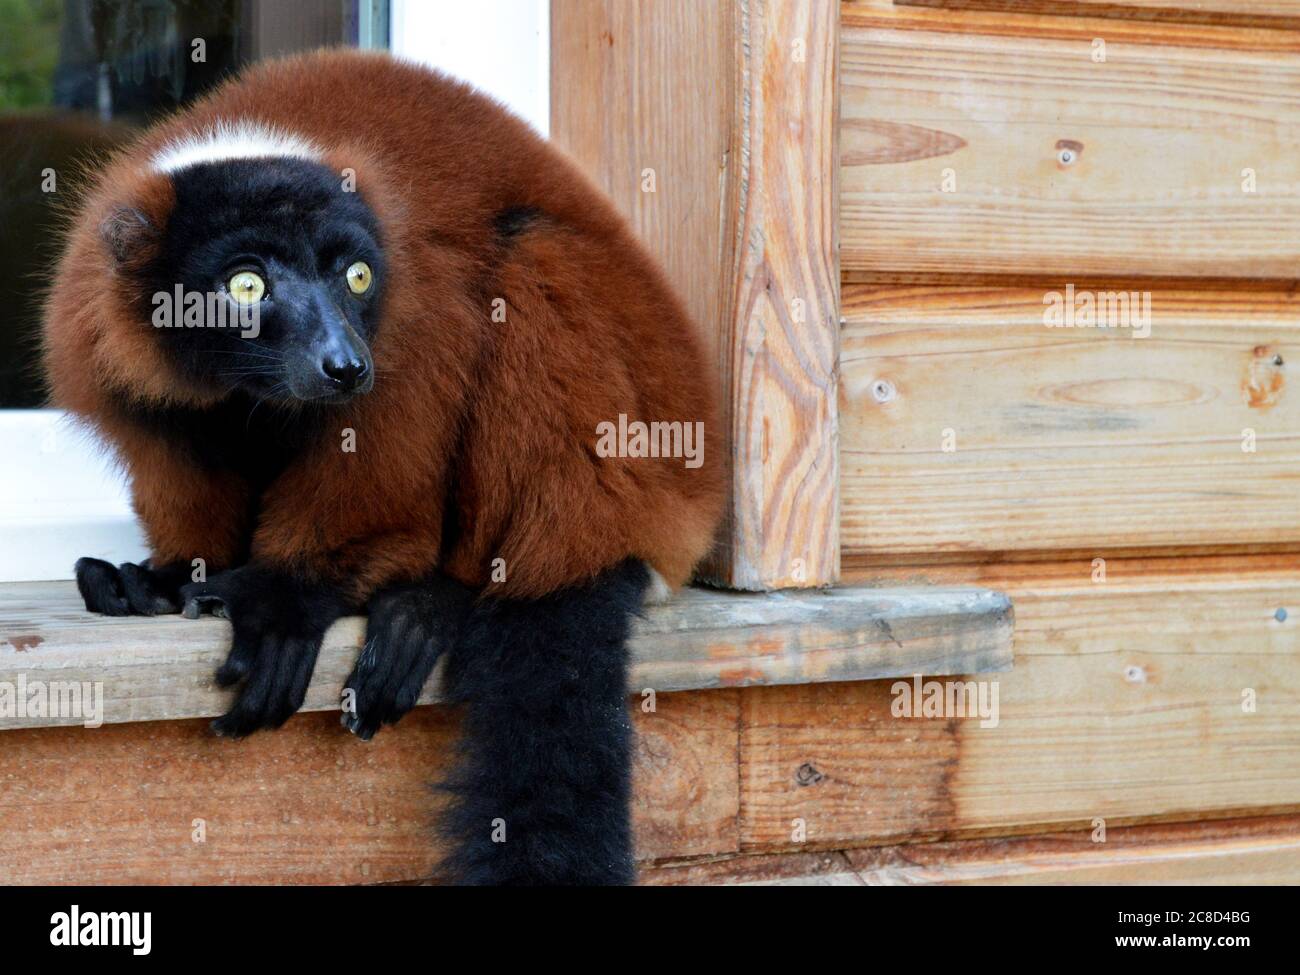 Magnificent red ruffed lemur, it is a lemuridae type monkey. This is endangered animal. Stock Photo